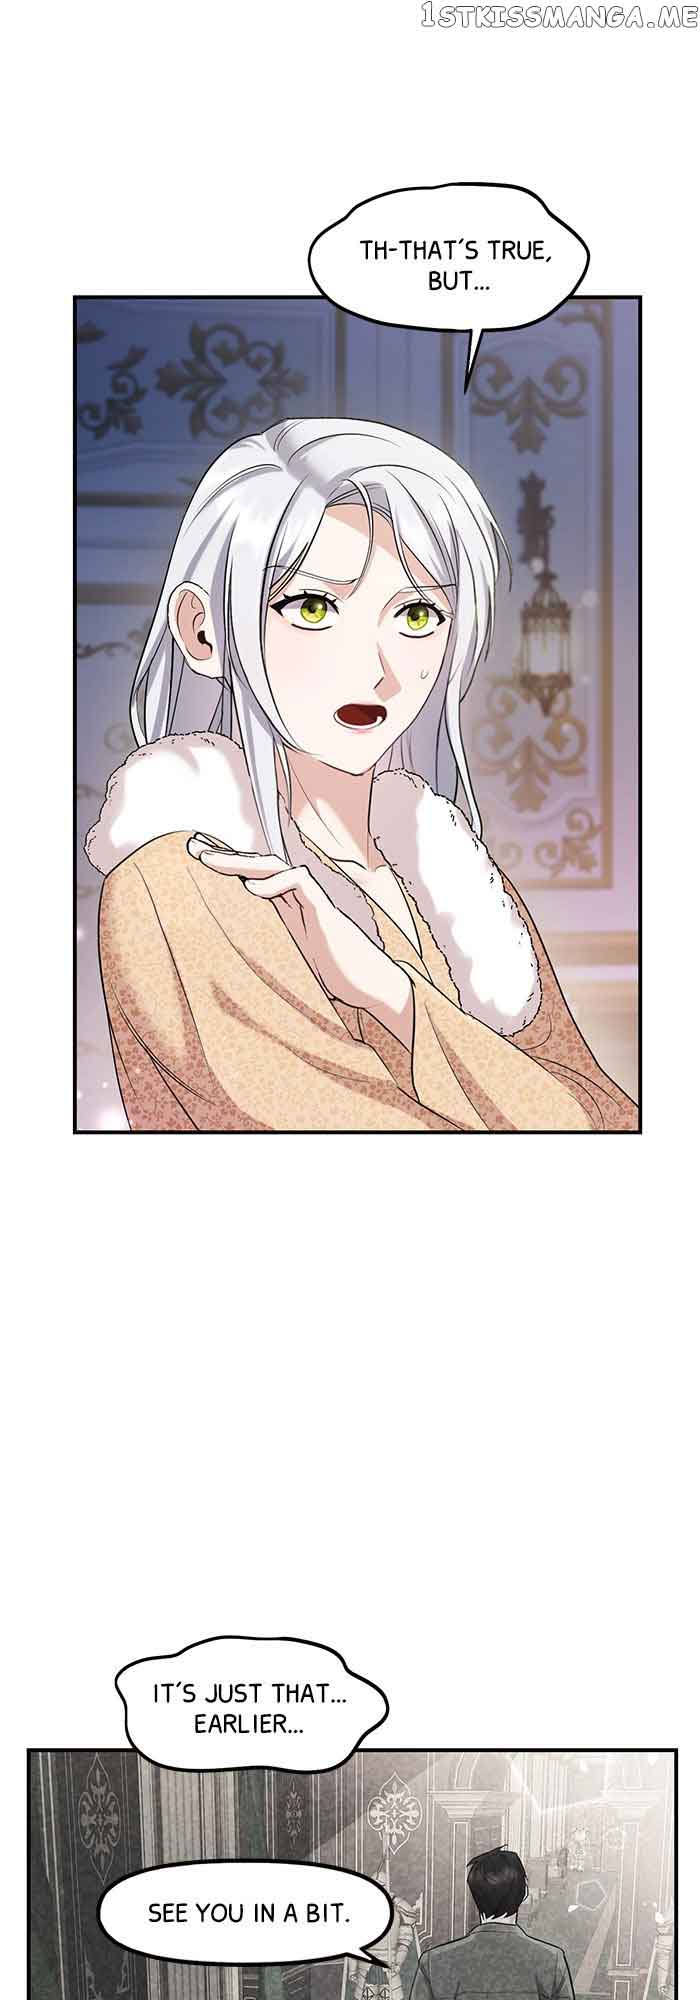 The Fake Duchess In Distresss chapter 14